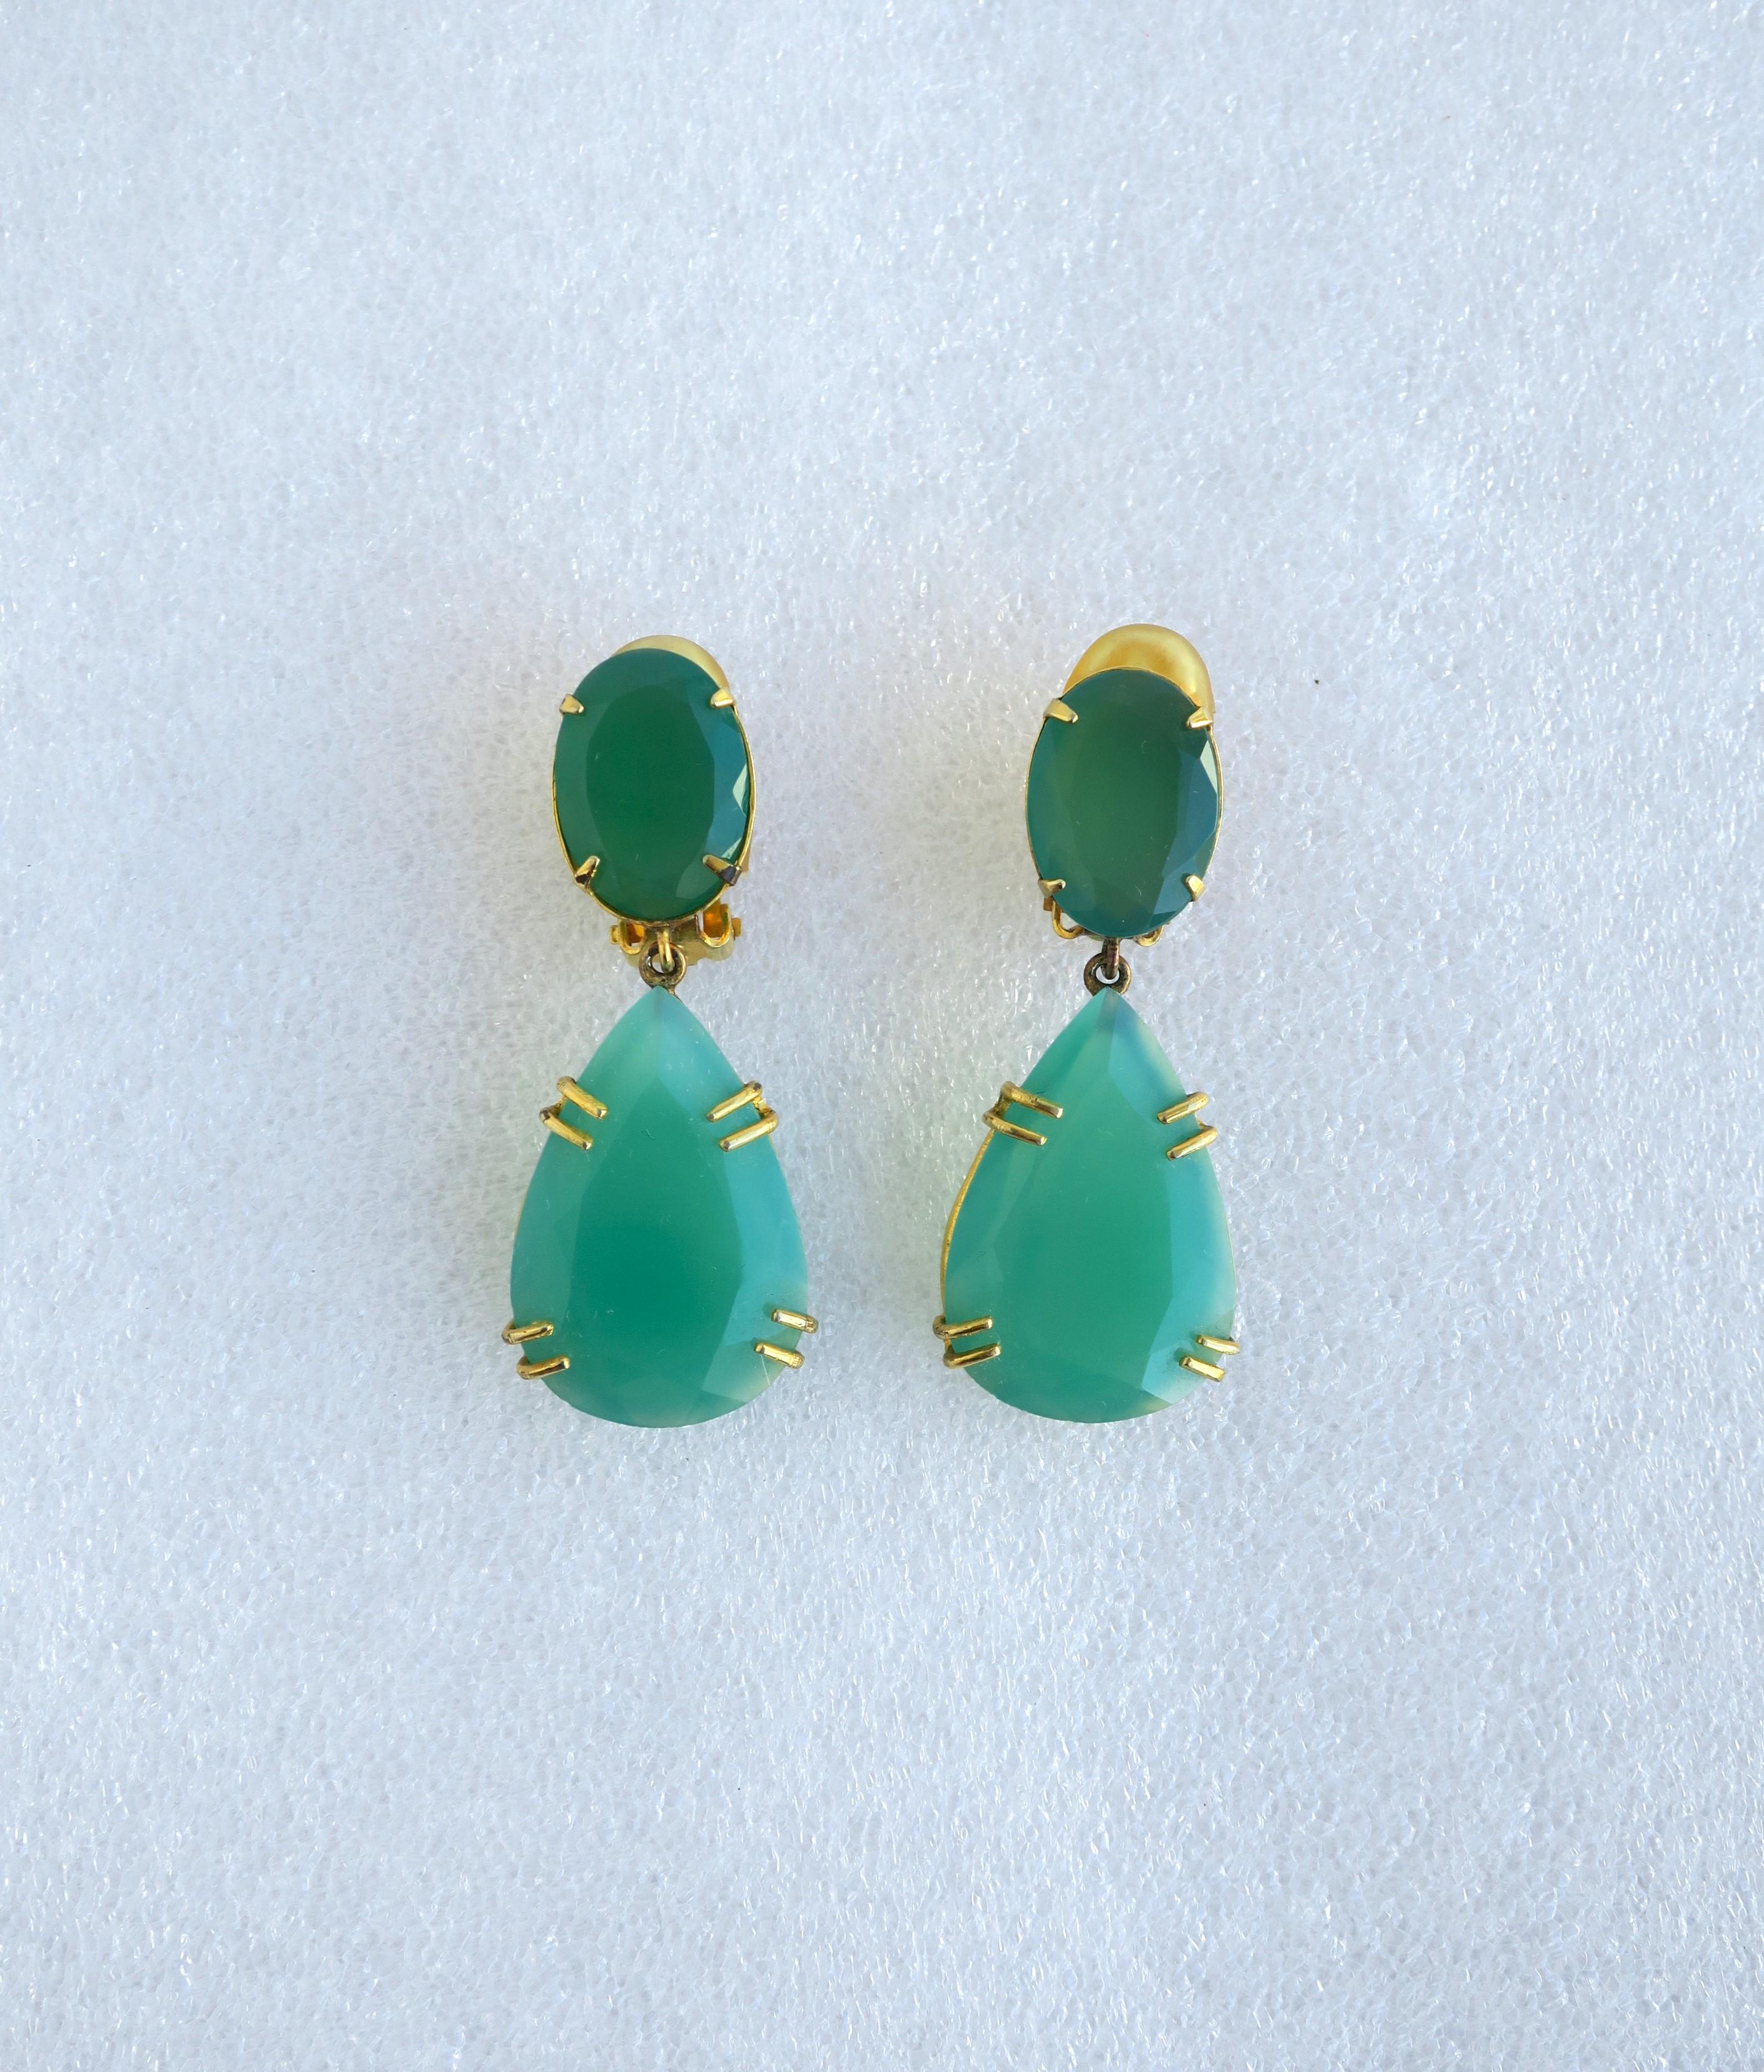 A stunning pair of relatively large Chrysoprase drop earrings featuring faceted oval and marque emerald green Chrysoprase stones, embraced by a gold-tone metal finish setting. Earring backs are clip-on with comfort covered backs. Earrings are